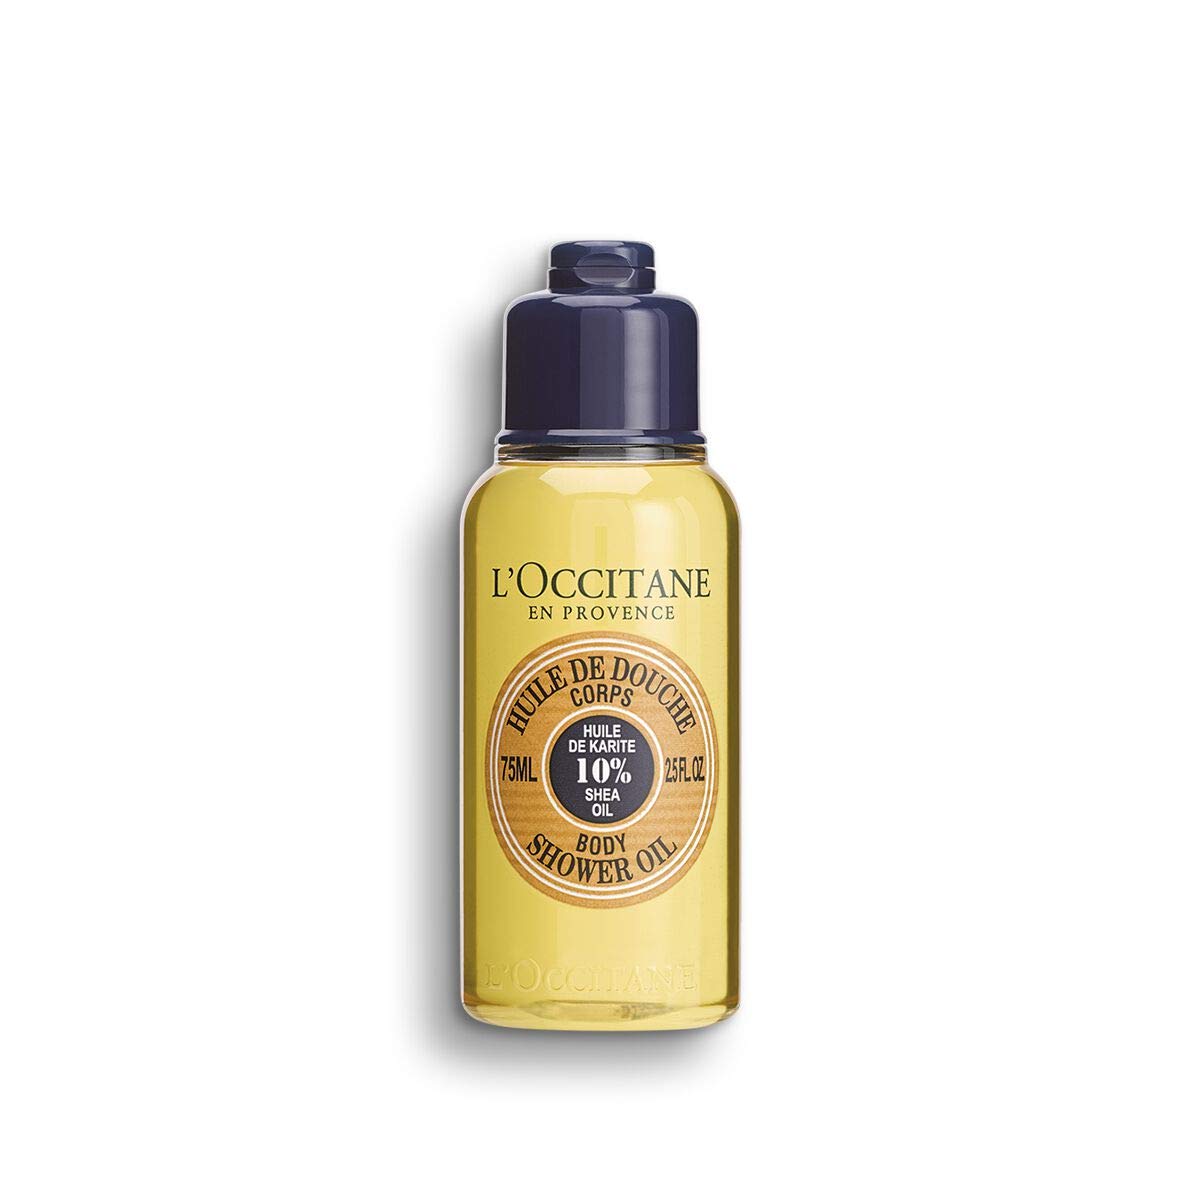 L'Occitane Shea Body Shower Oil with 10% Shea Oil: Luxuriously Rich, With Shea Oil, Soothe Feelings of Tightness, Soften Skin, Fresh Scent